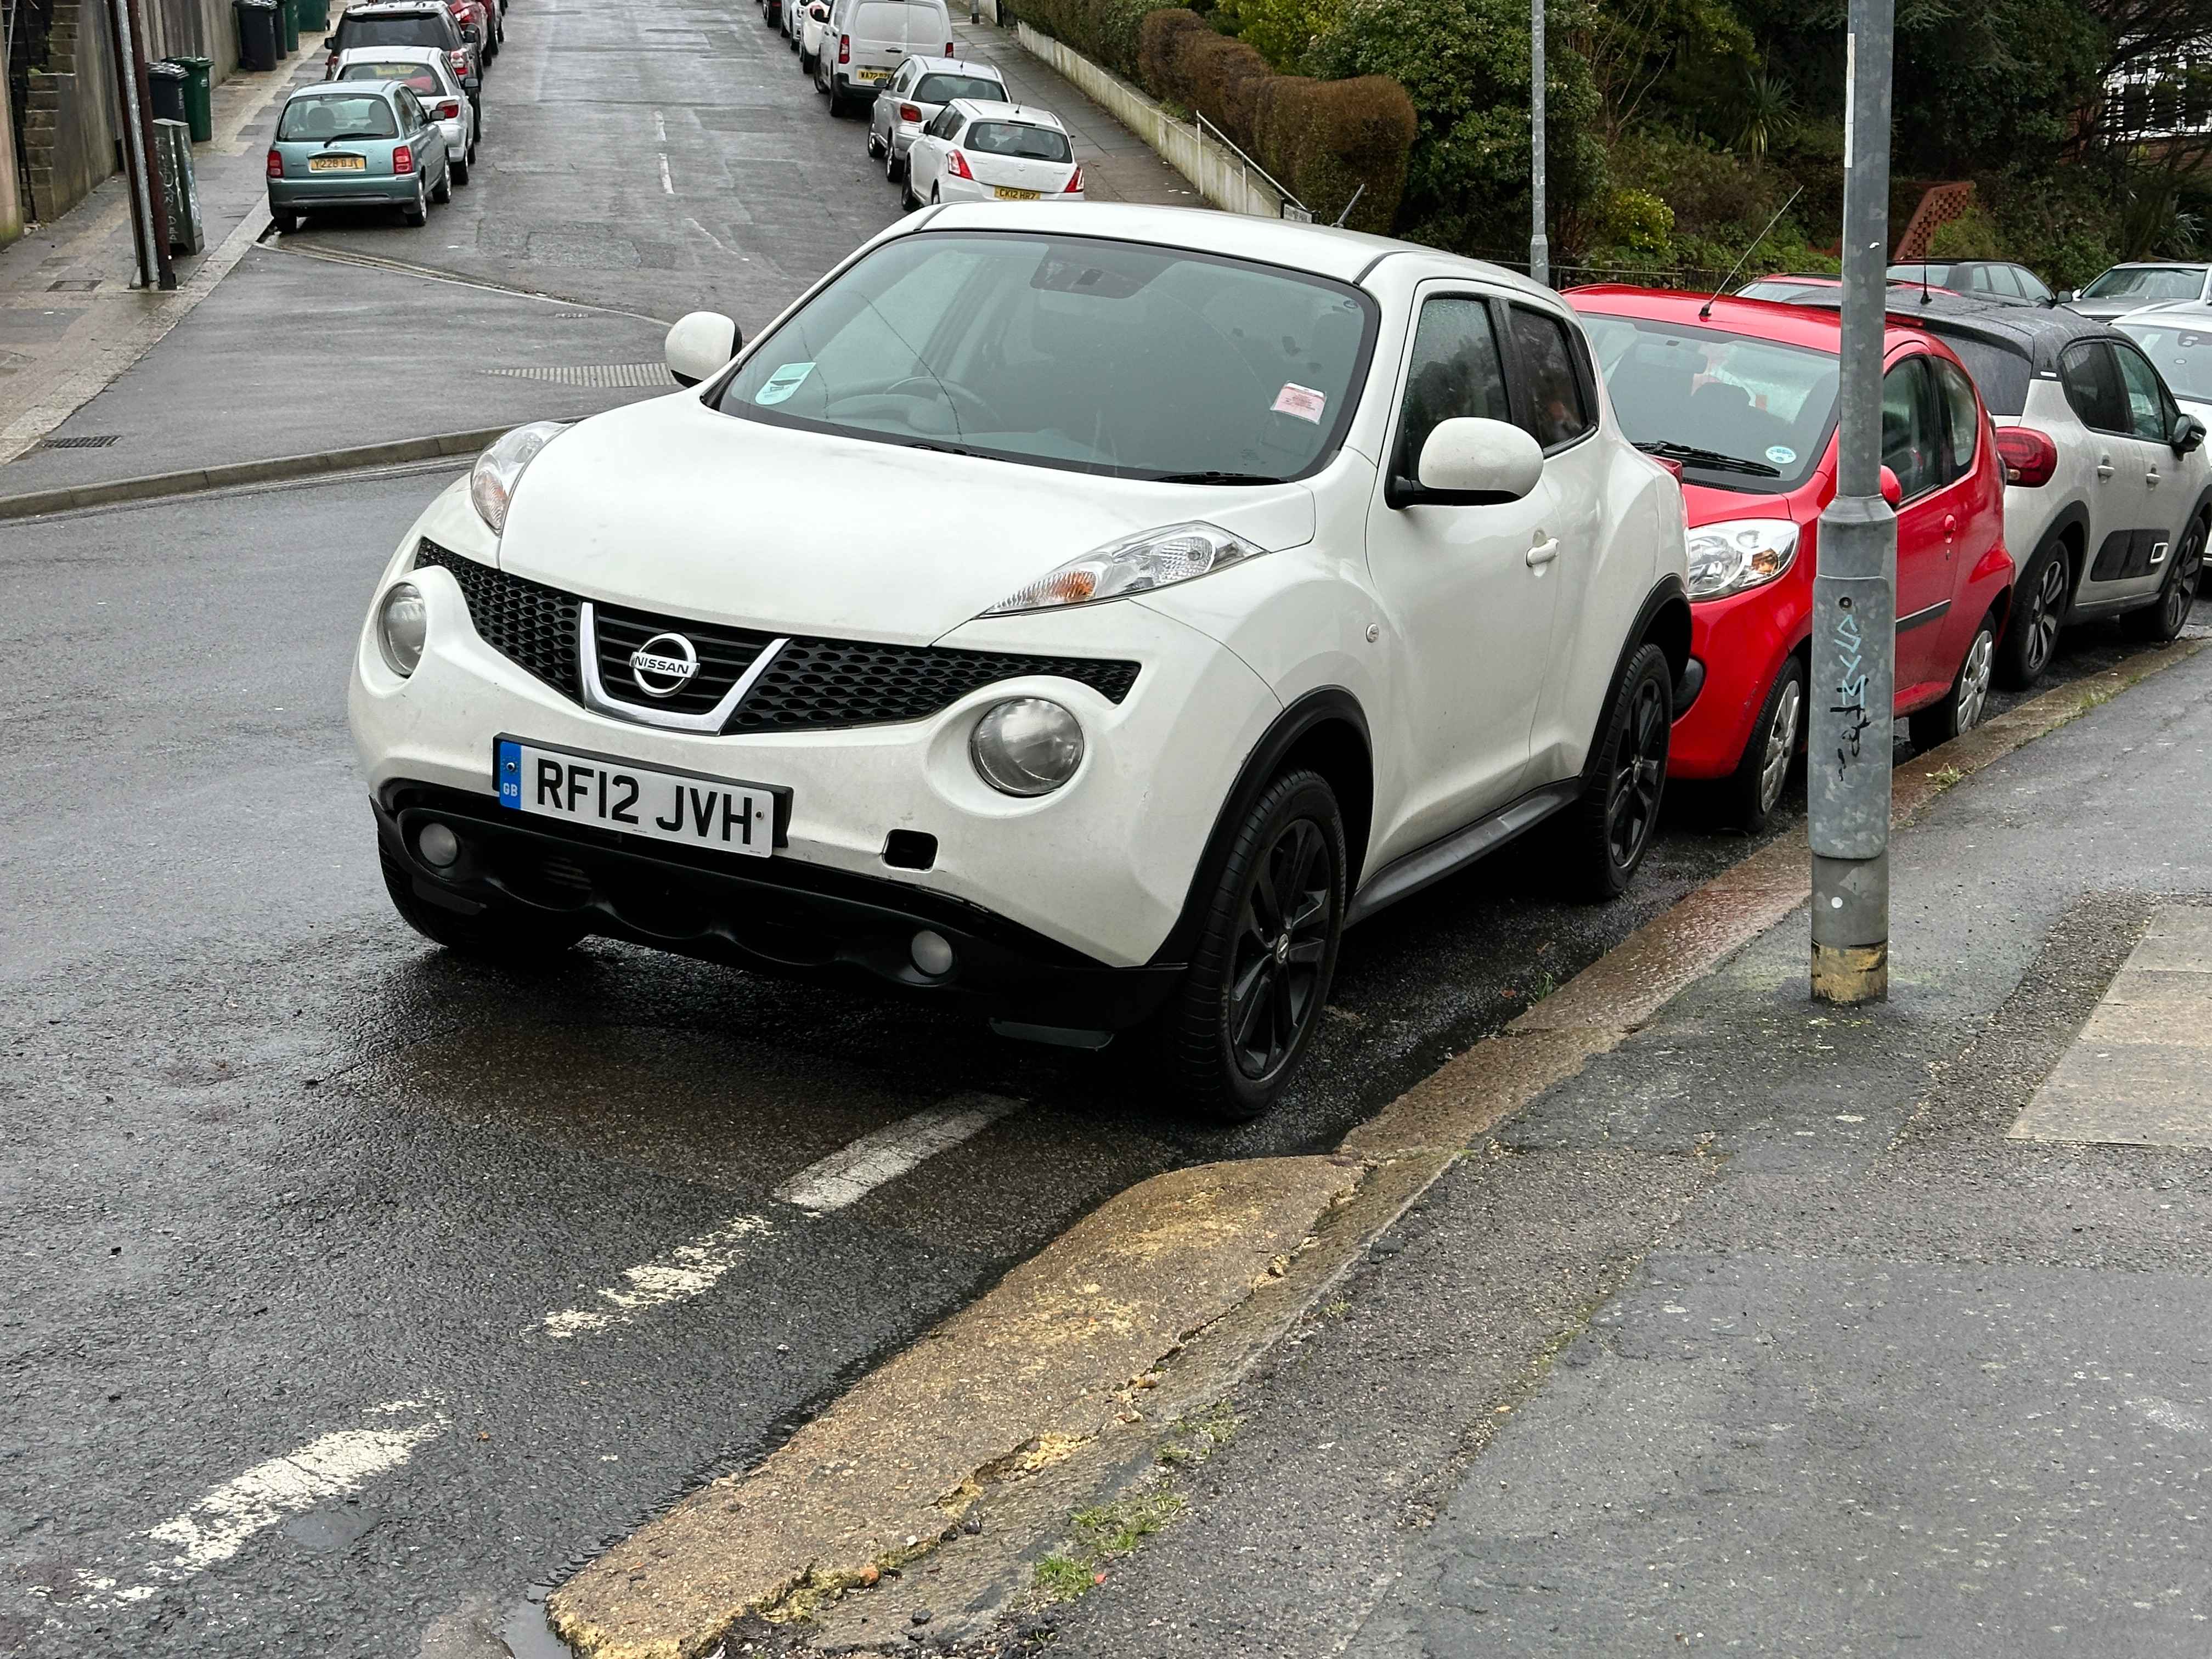 Photograph of RF12 JVH - a White Nissan Juke parked in Hollingdean by a non-resident who uses the local area as part of their Brighton commute. The second of three photographs supplied by the residents of Hollingdean.